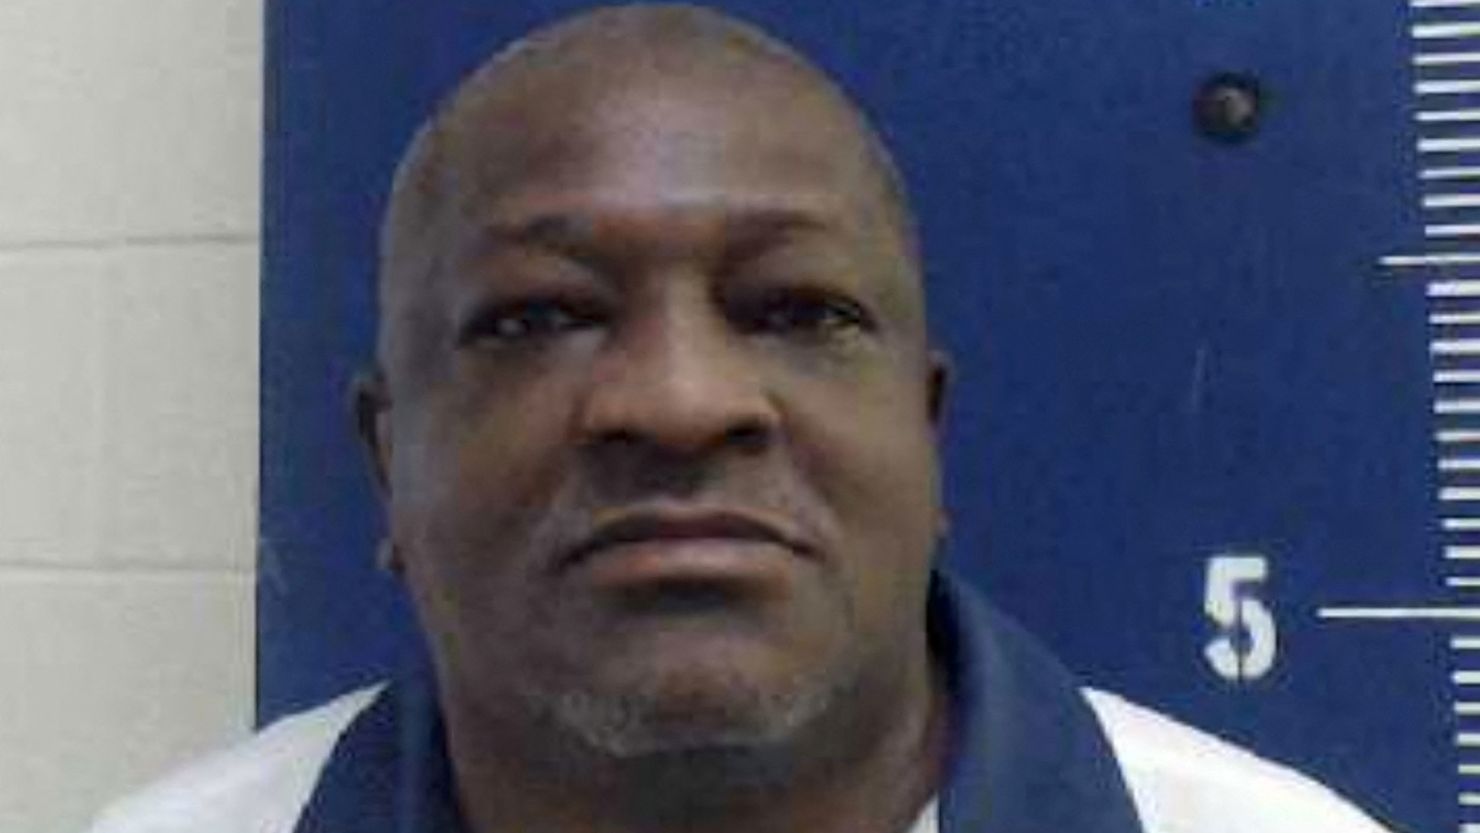 Willie James Pye, who is on death row awaiting execution at Georgia Diagnostic and Classification Prison, poses for a Georgia Department of Corrections photograph on an unspecified date.